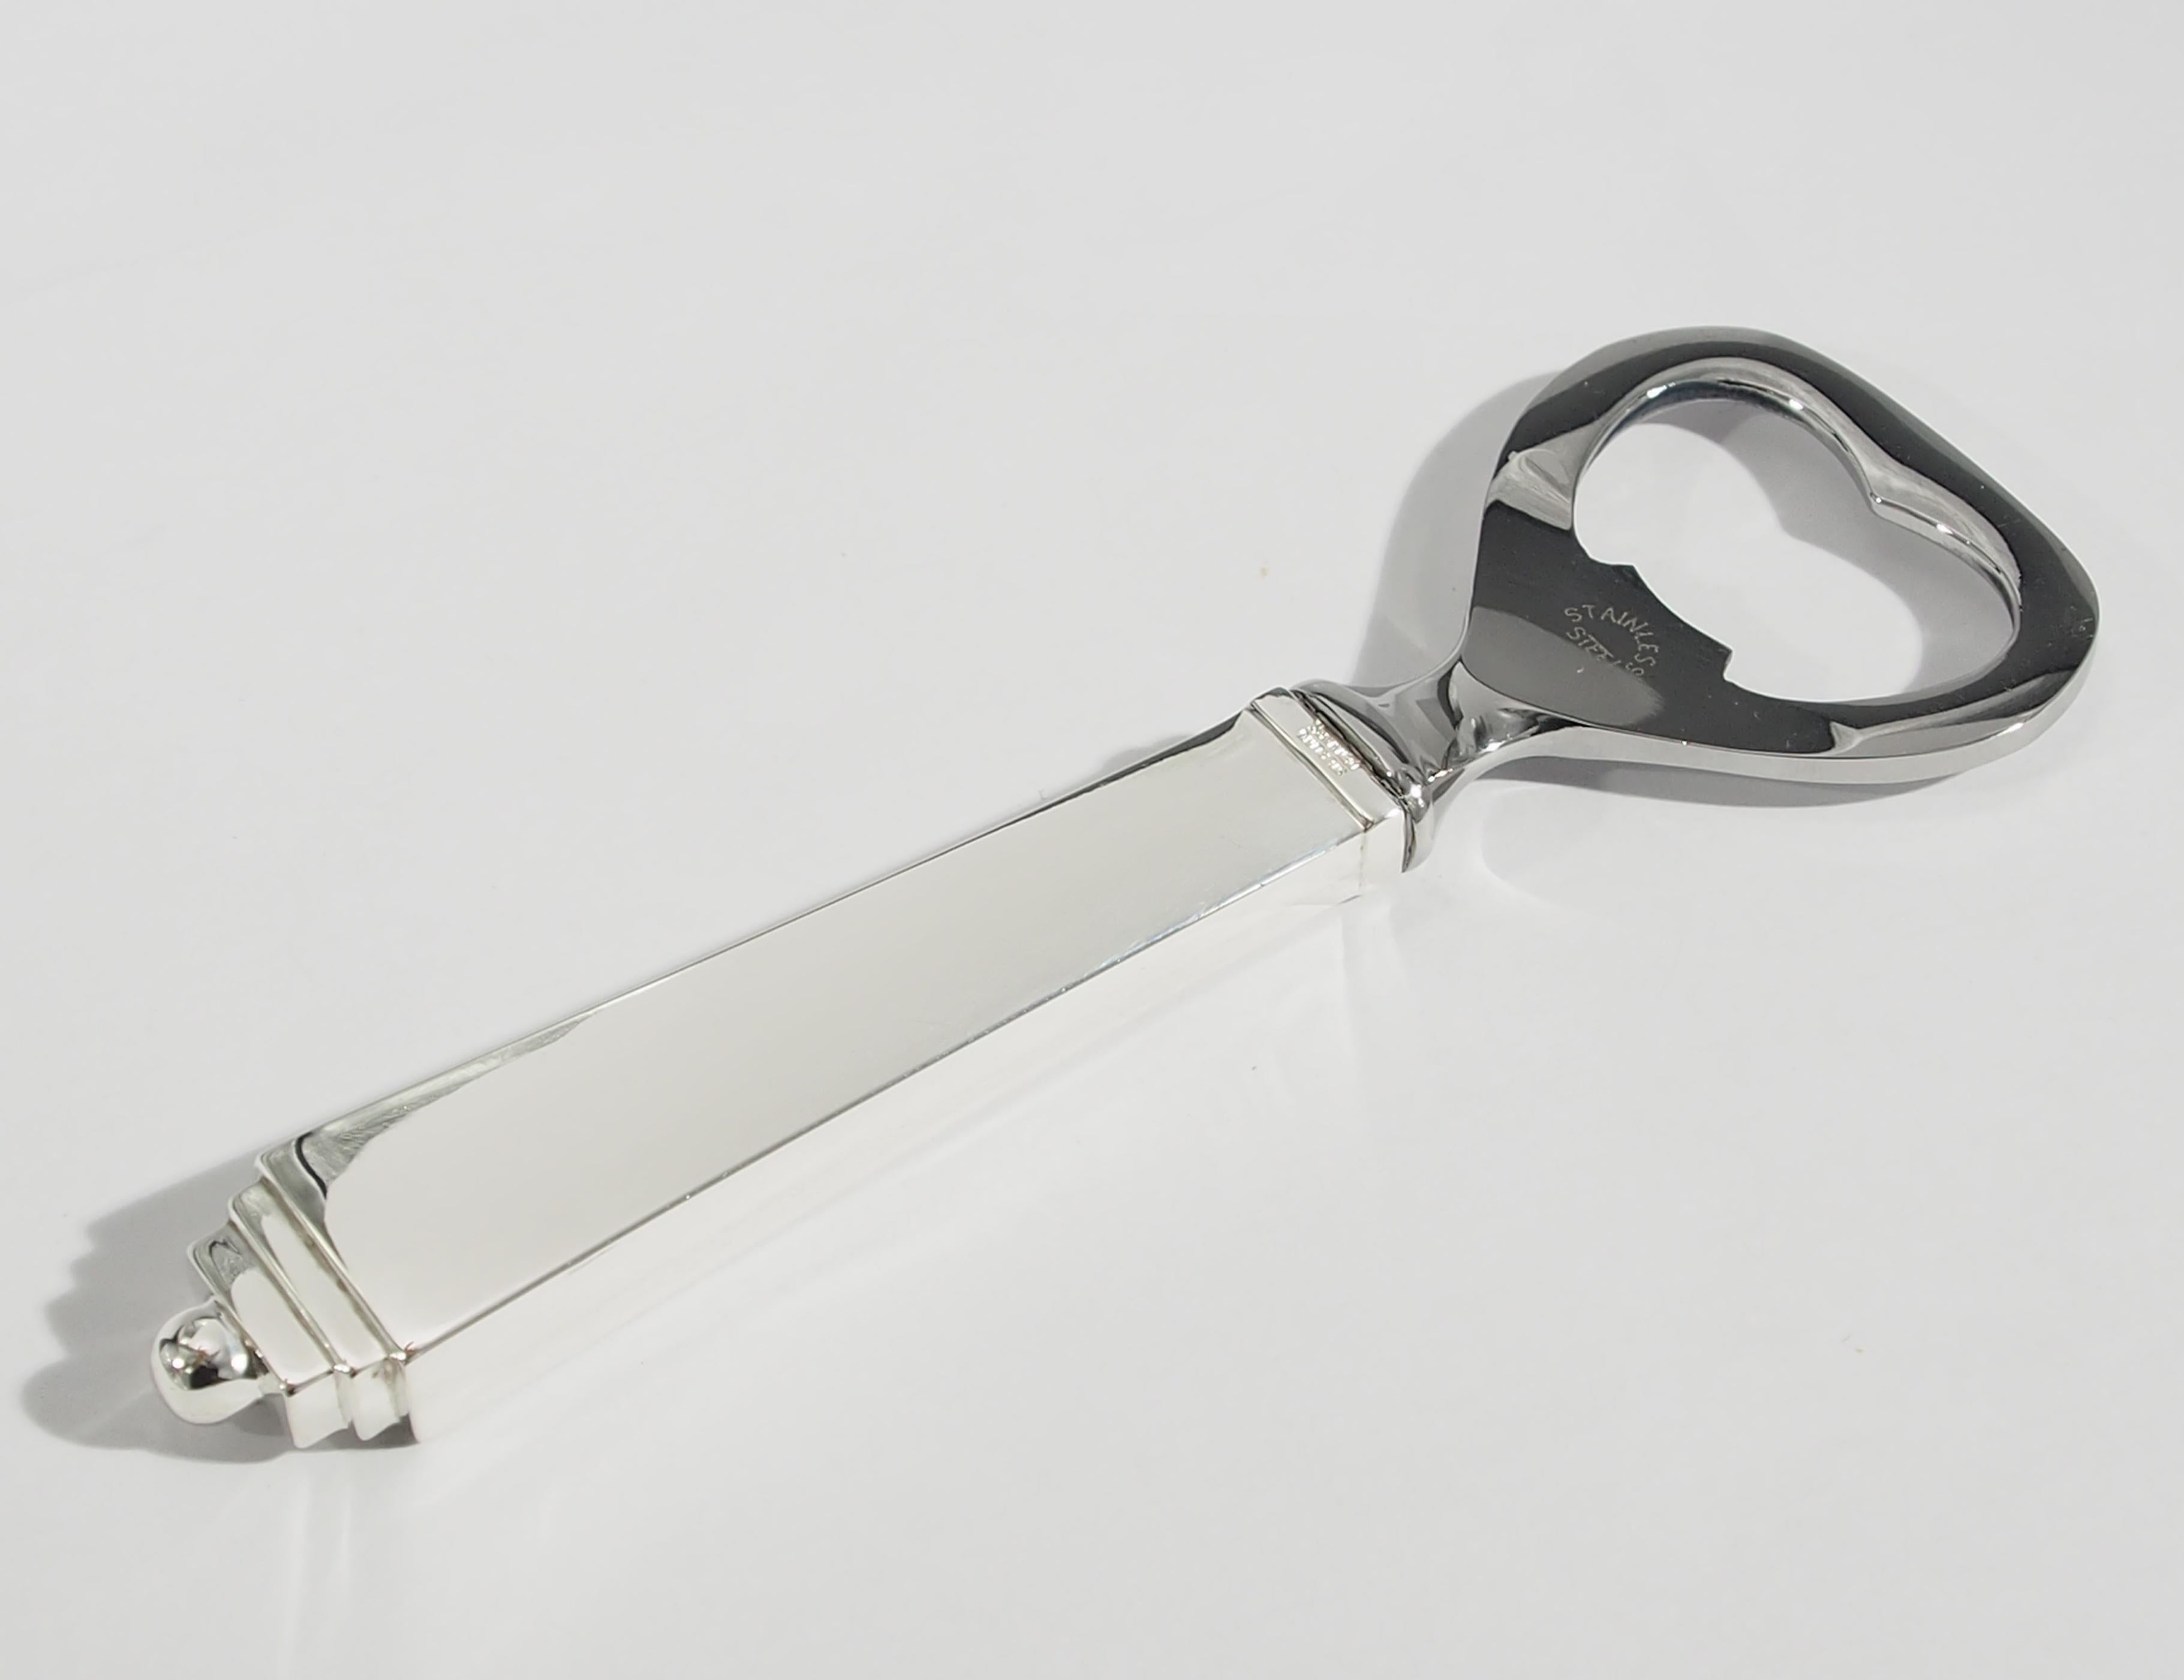 From the respected Sterling Silver Designer, Georg Jensen is this vintage Bottle Opener. Fashioned in a geometric pattern the Opener is 4 1/2 inches in length and tapering from 1/2 inch at the handle to tapering to 1-1/2 inches in width at the top.